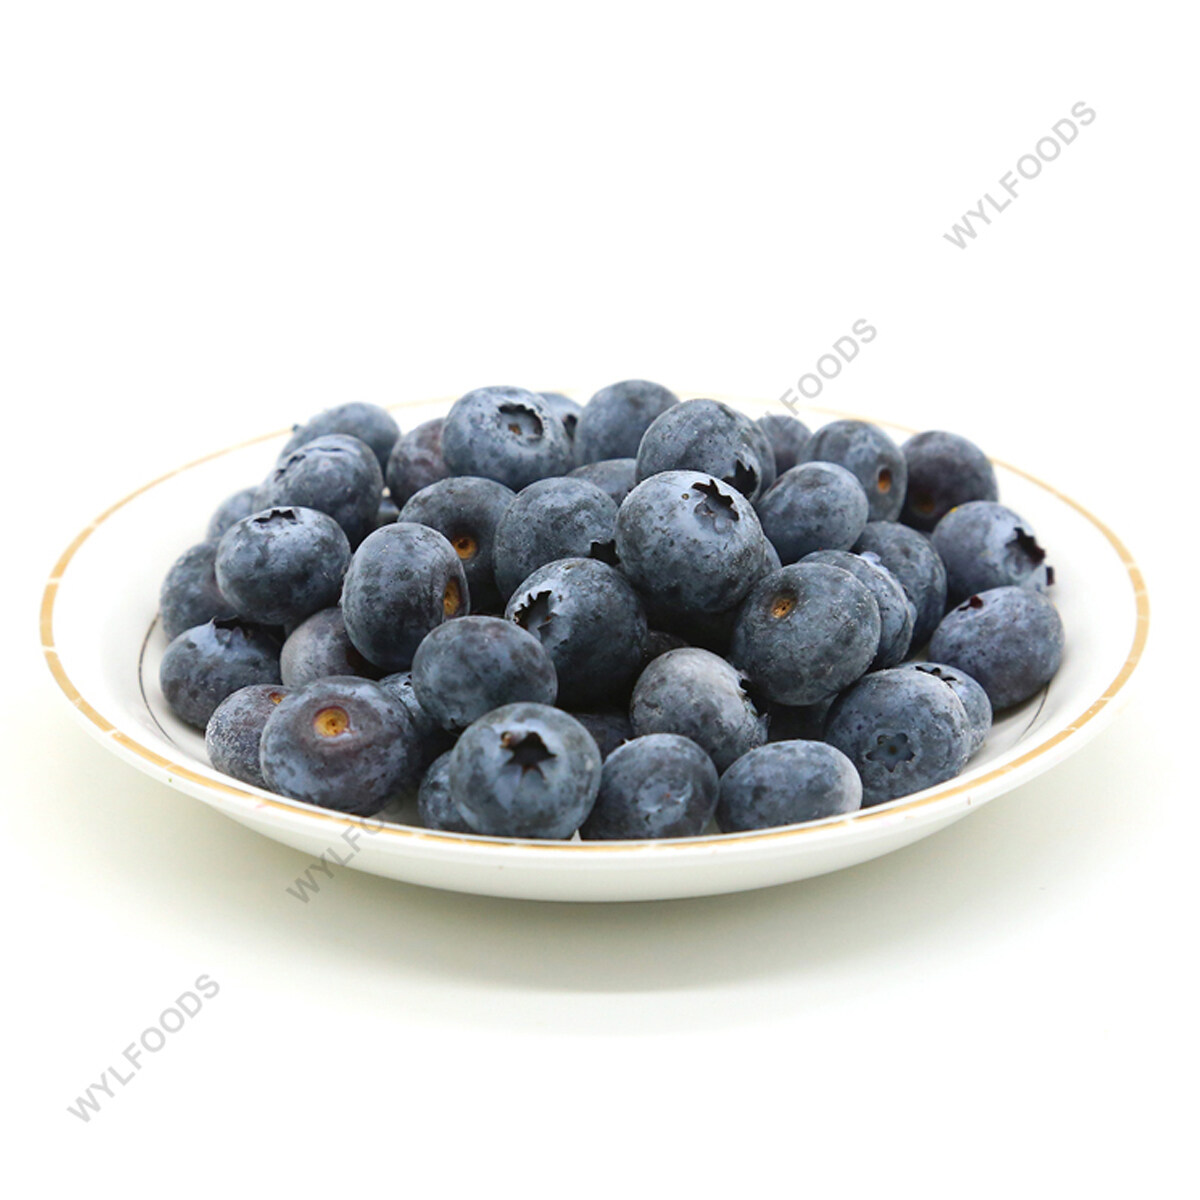 BRC-A diluluskan 12-16mm iqf blueberries 15% Brix Whole Frozen Blueberry